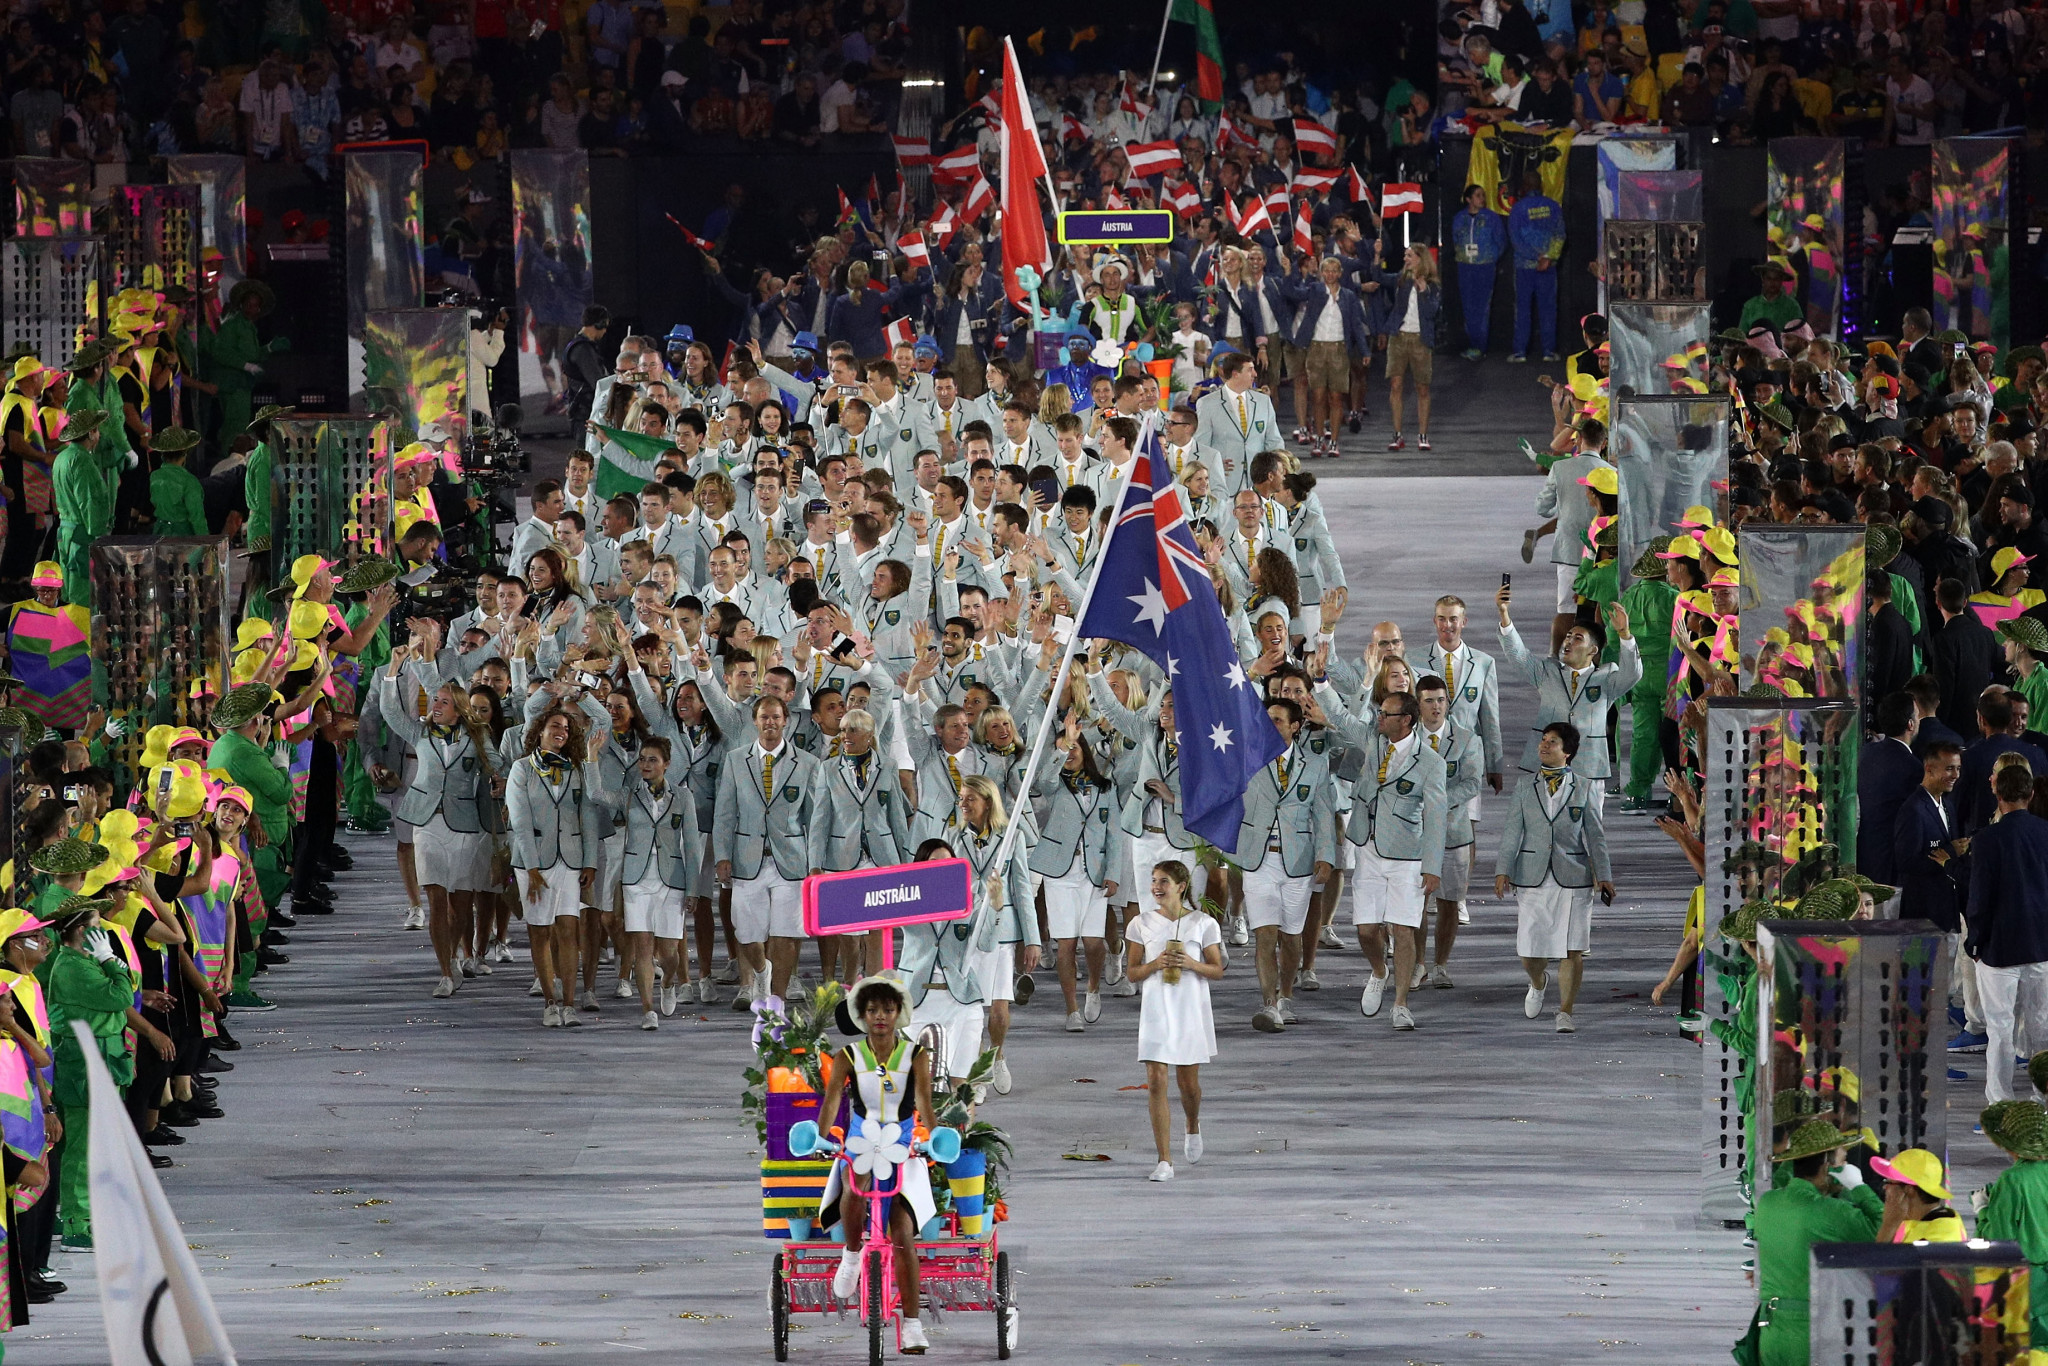 Student athletes have been found to have contributed heavily to Australia's medal success at recent Olympics ©Getty Images